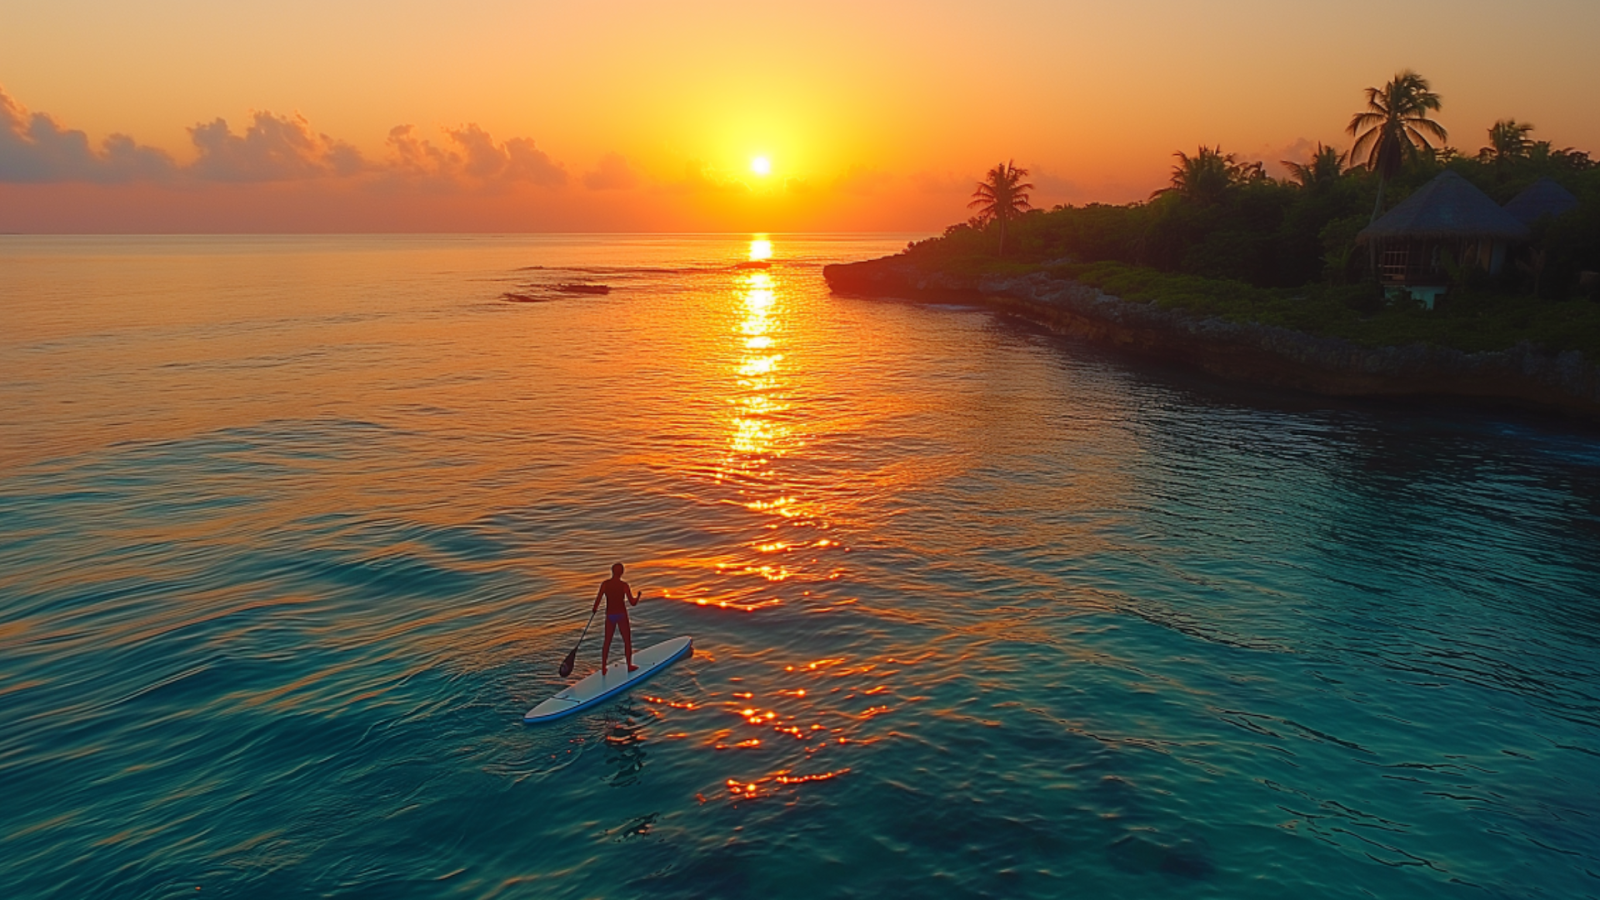 A tranquil early morning paddleboarding session in the serene waters of Playa del Carmen.